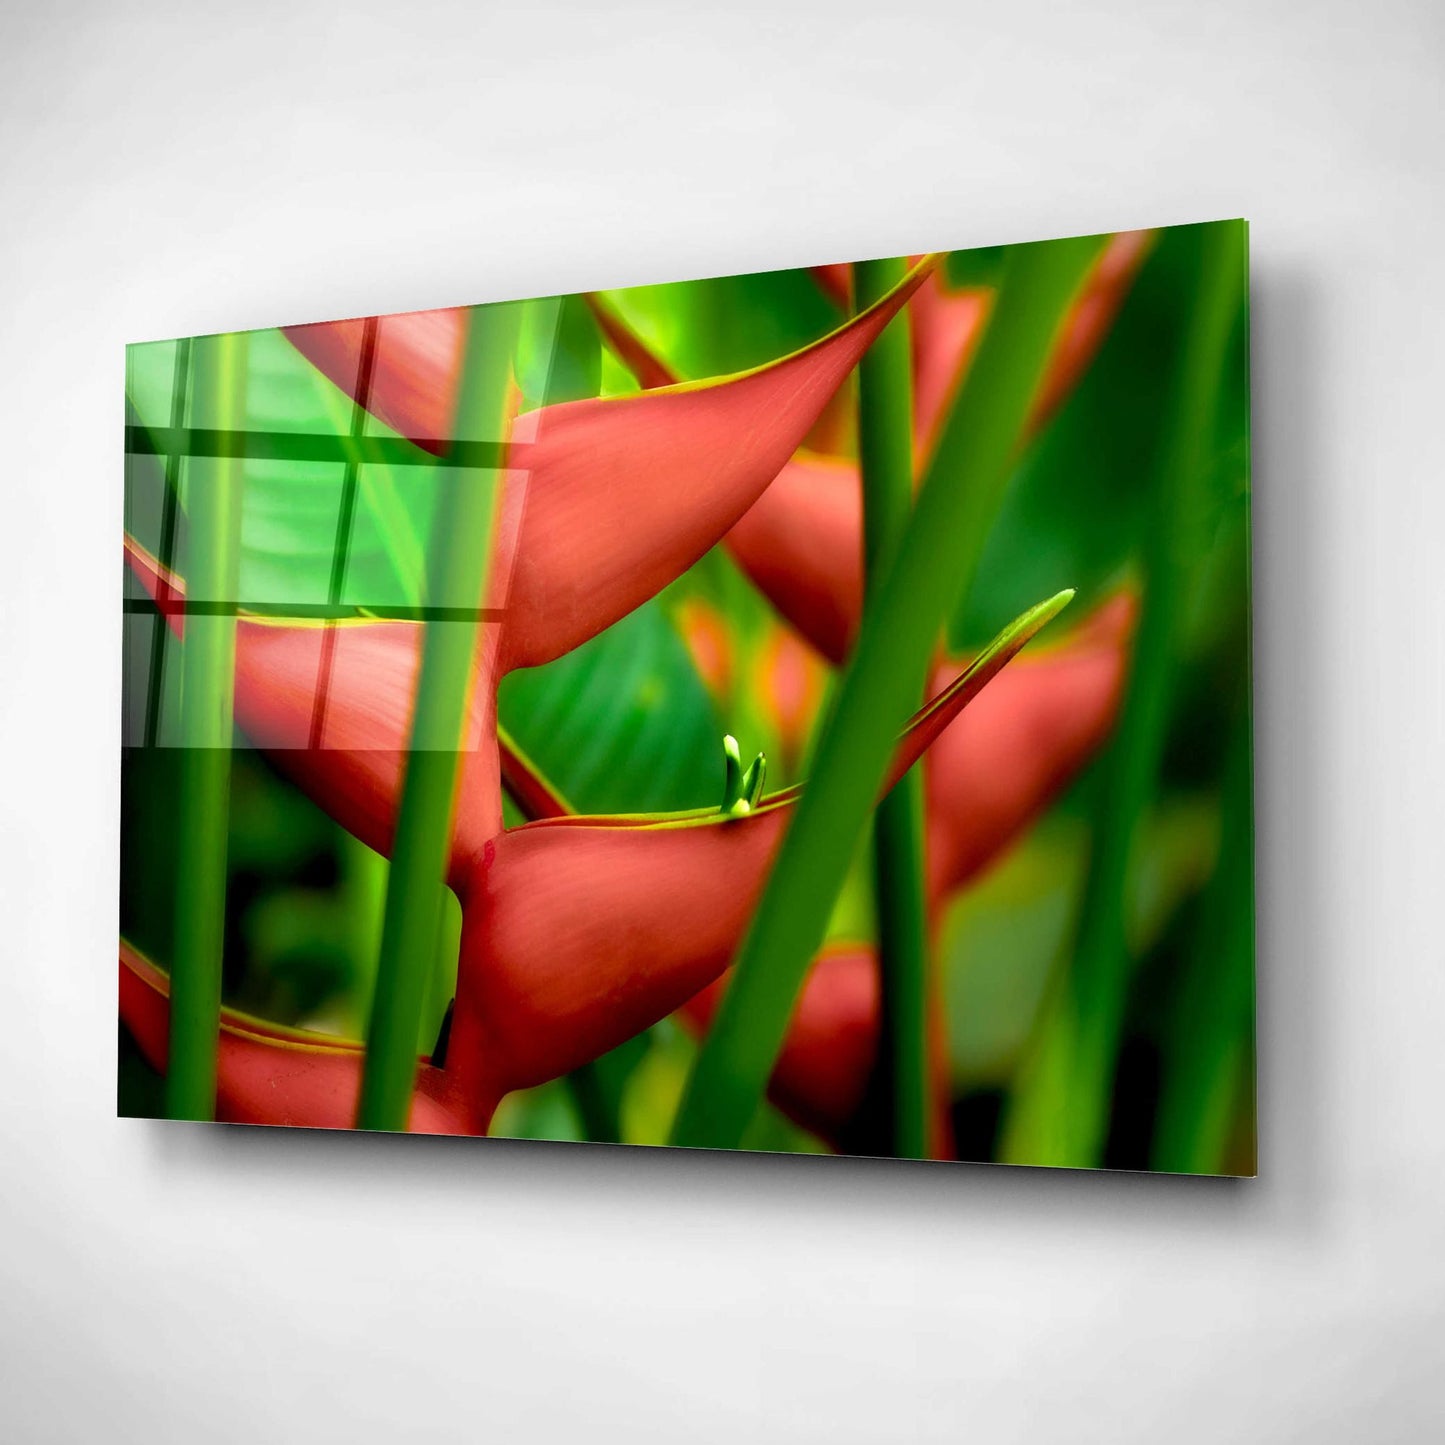 Epic Art 'Floral Details' by Dennis Frates, Acrylic Glass Wall Art,16x12